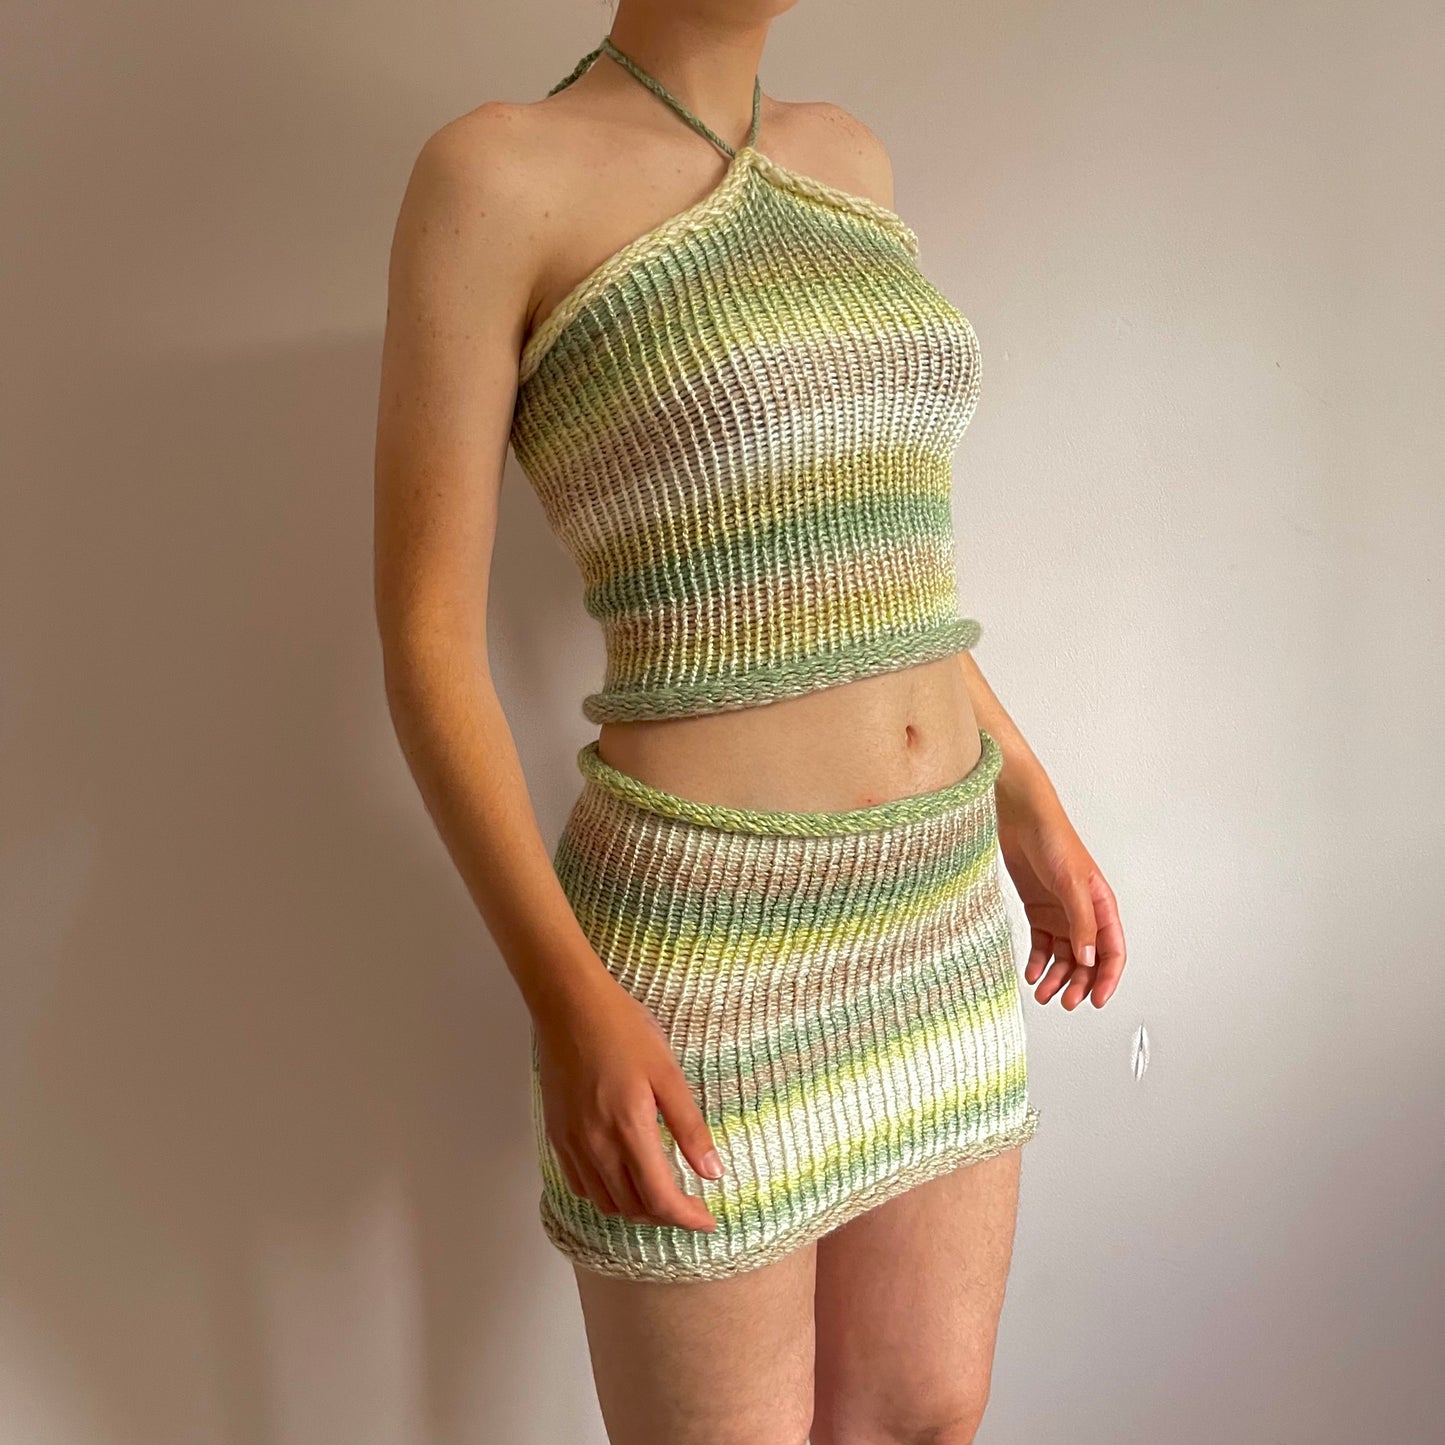 SET: Handmade knitted halter top and skirt in green, beige and cream